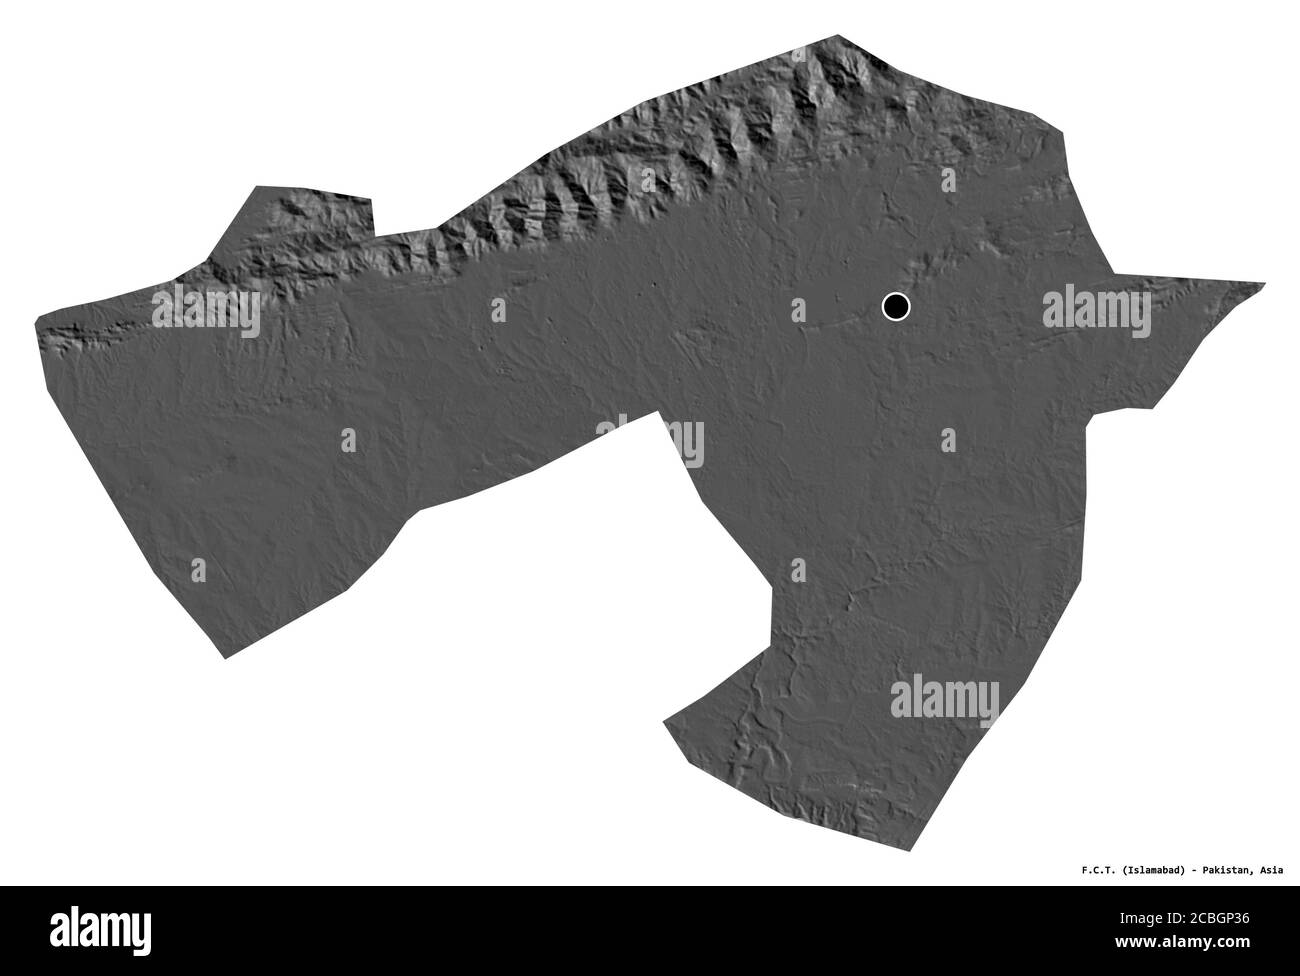 Shape of F.C.T., capital territory of Pakistan, with its capital isolated on white background. Bilevel elevation map. 3D rendering Stock Photo